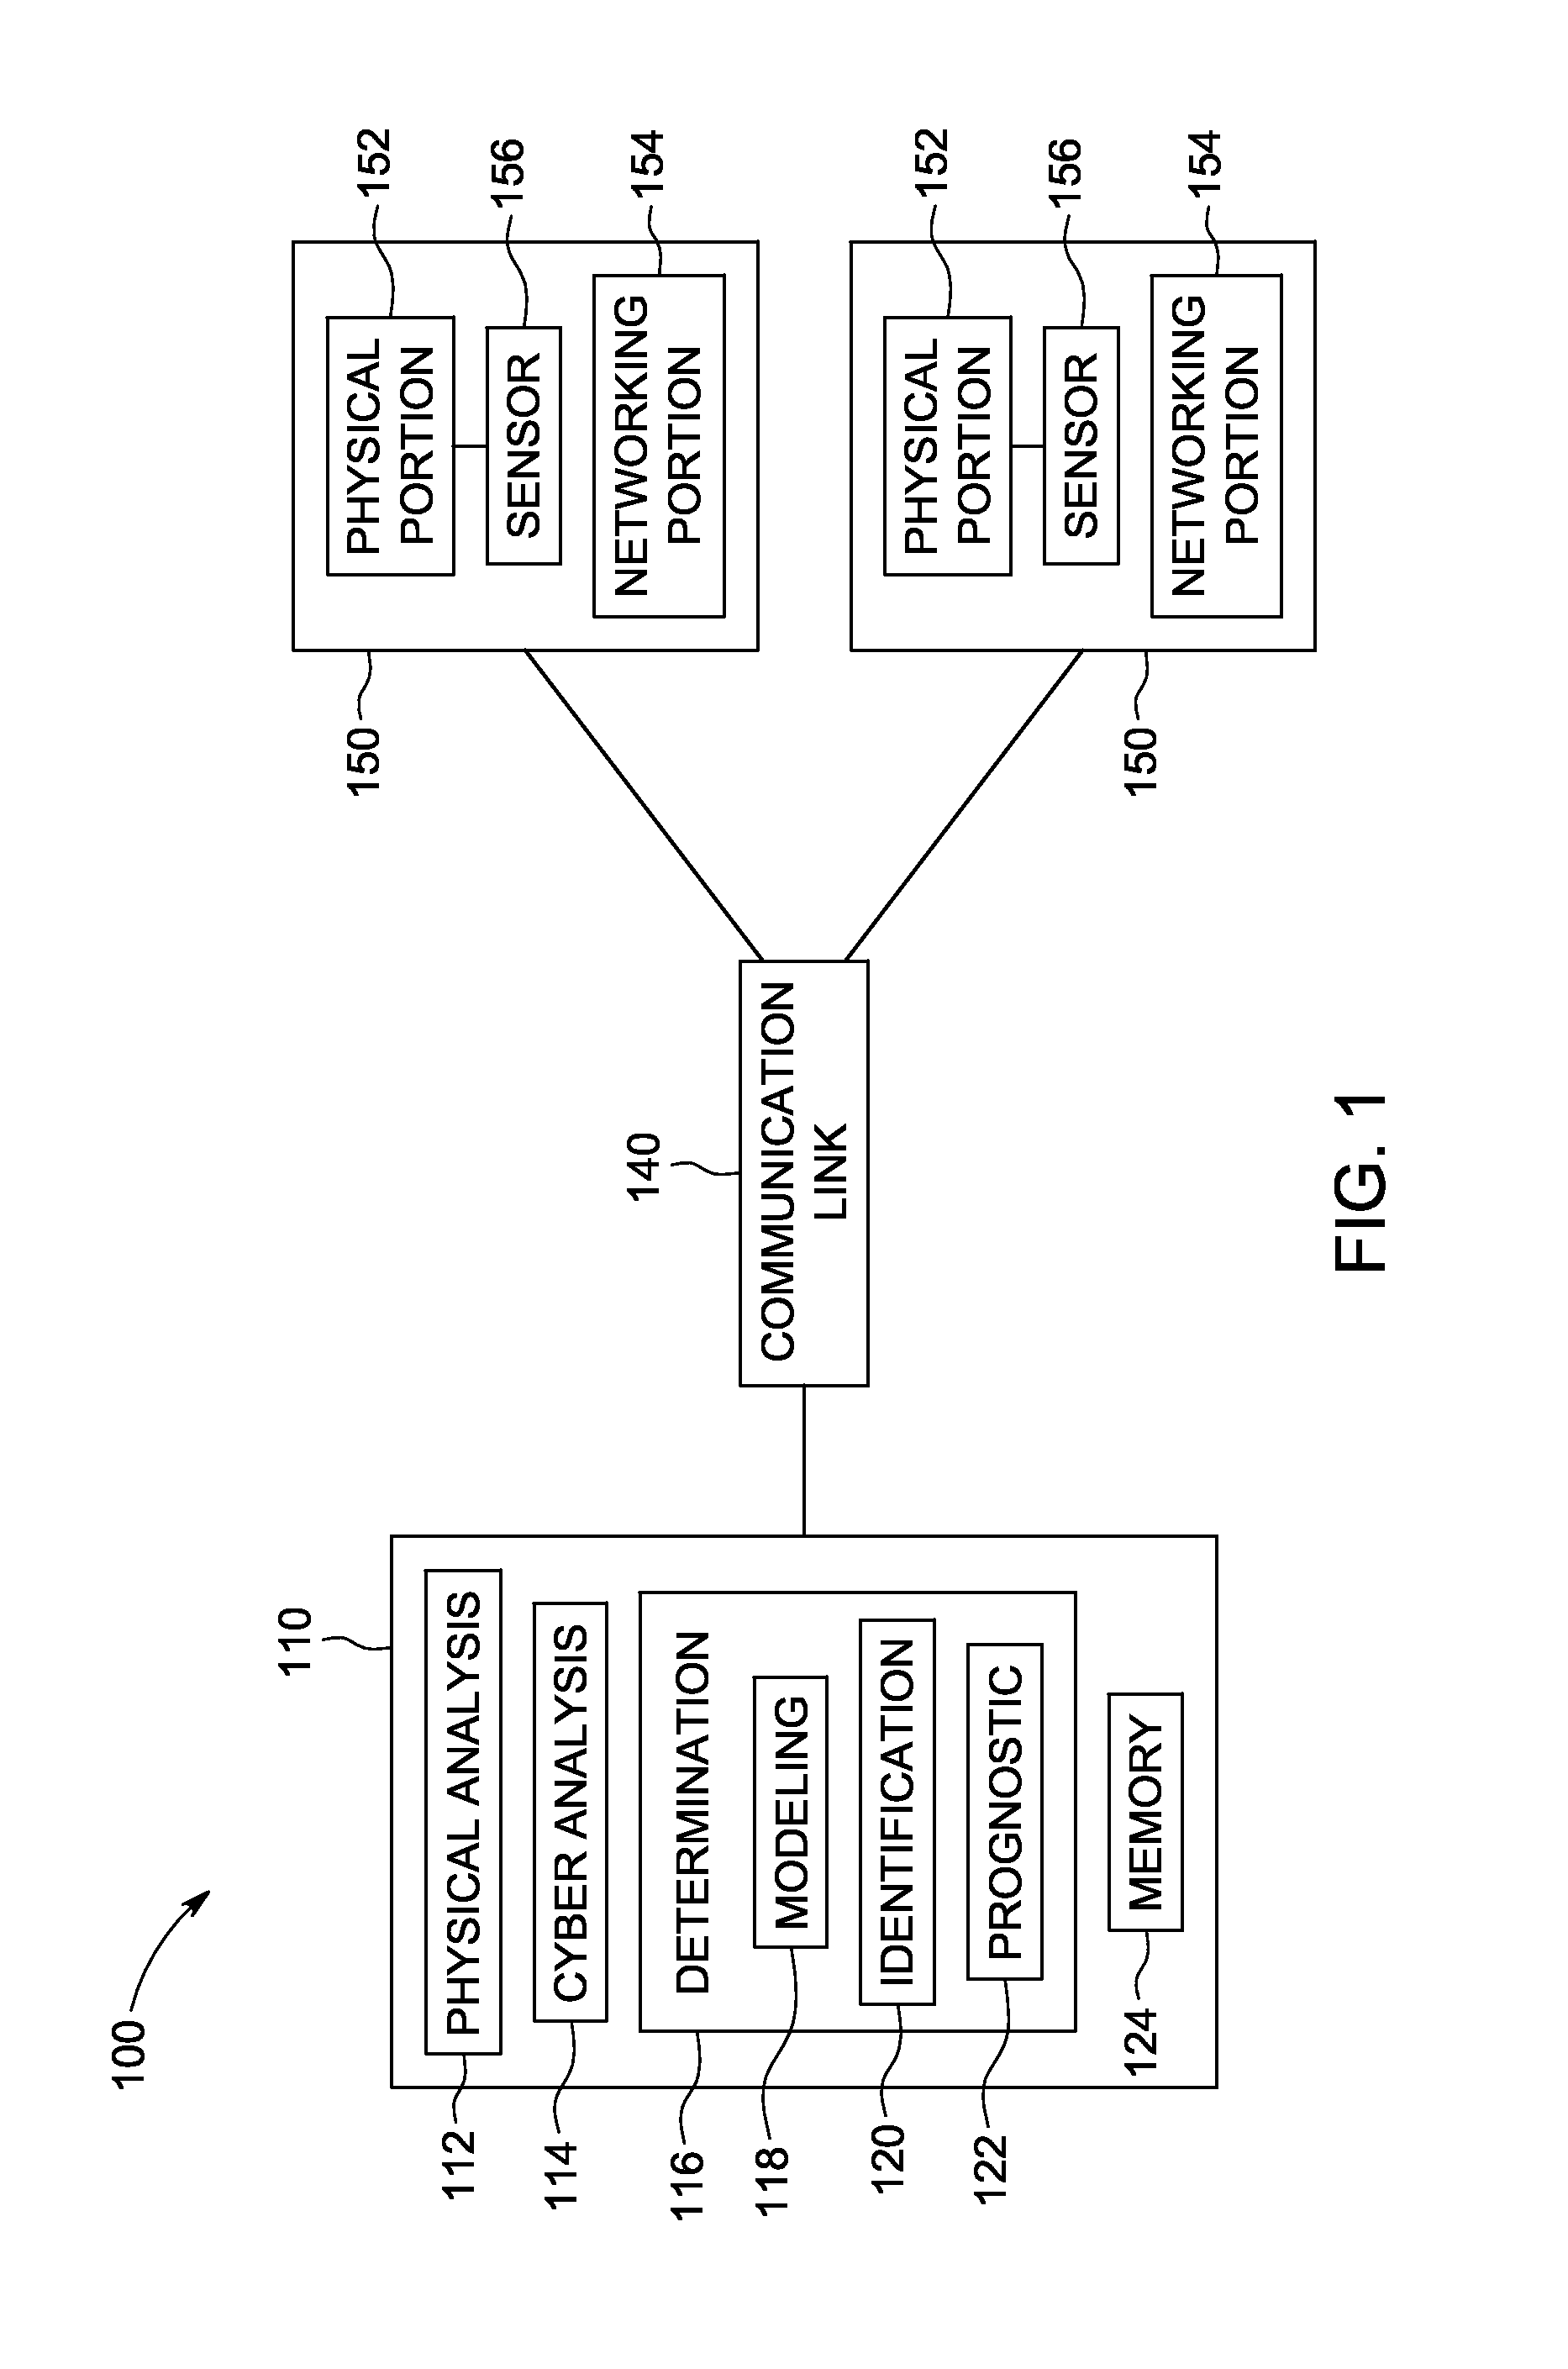 Systems and methods for remote monitoring, security, diagnostics, and prognostics